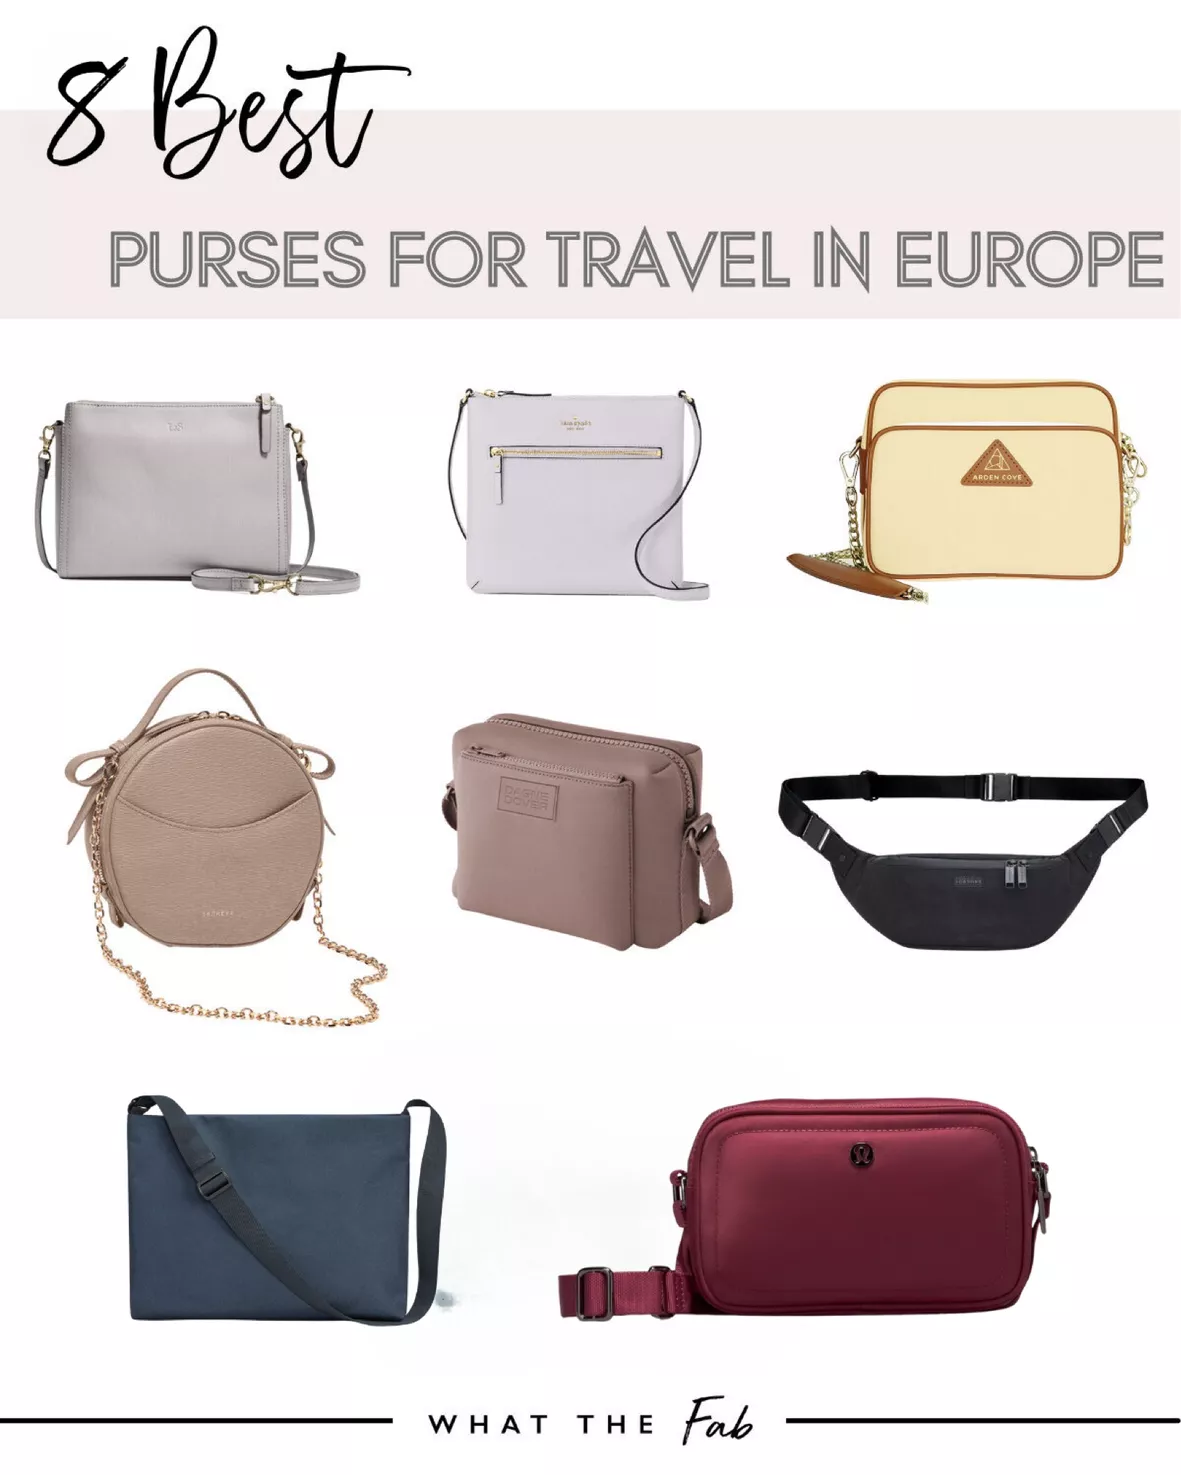 8 Great Crossbody Bags Perfect for Travel